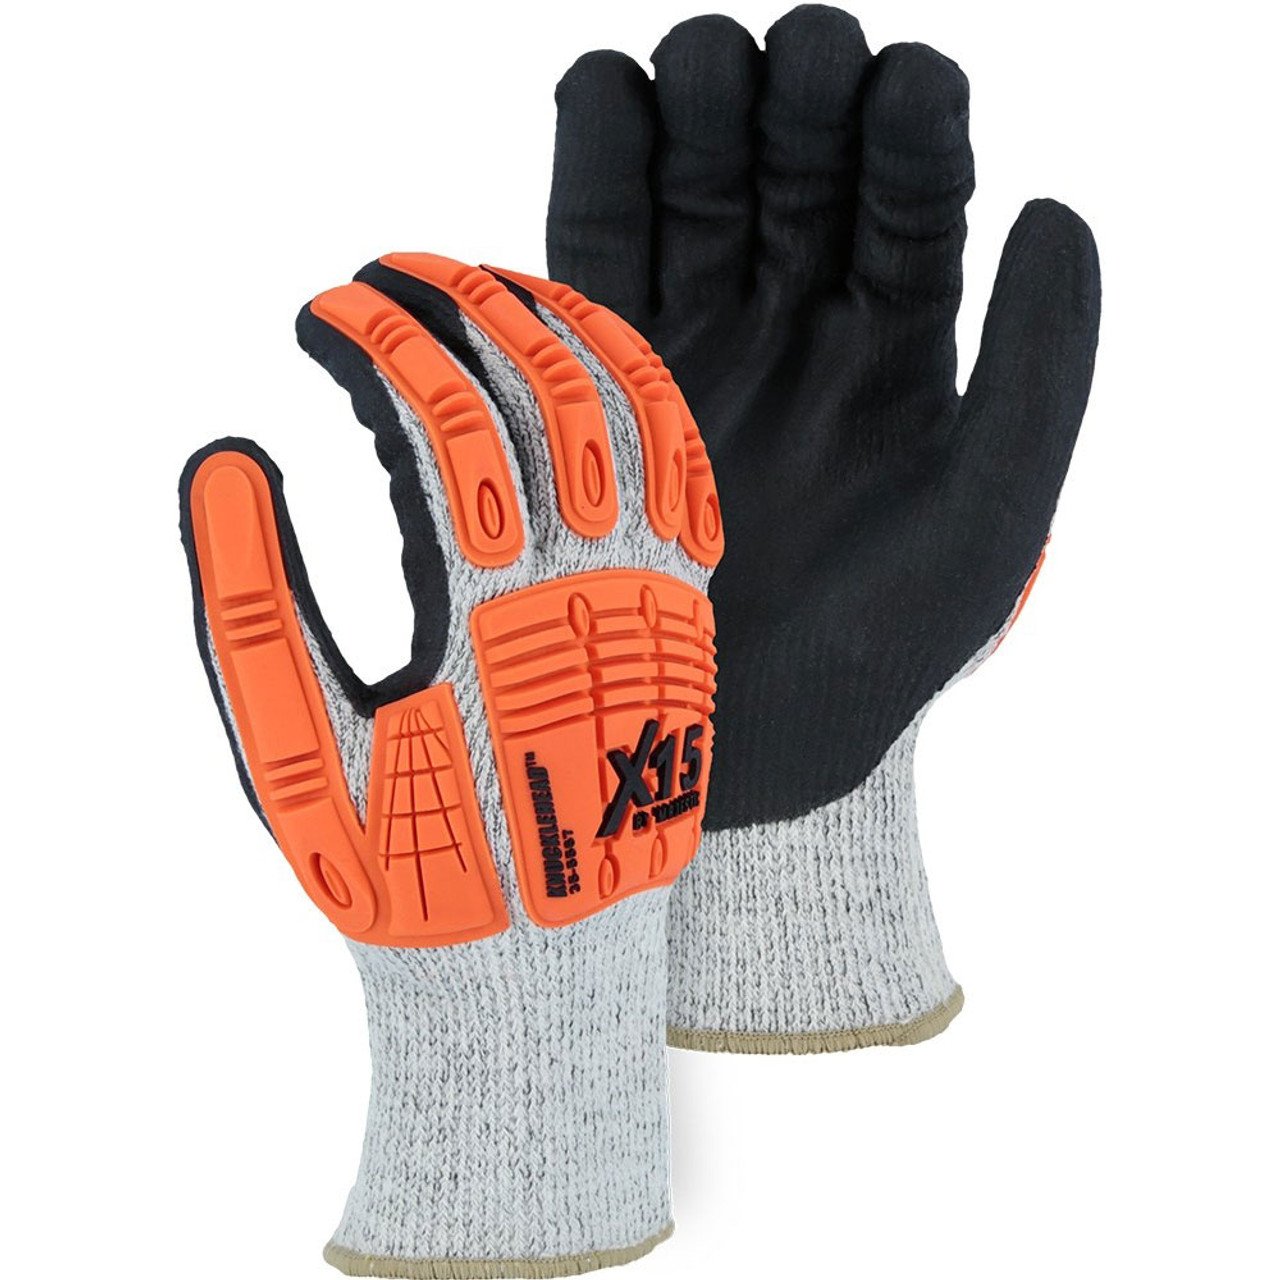 Level 5 Cutting Gloves Kitchen Safety Anti Cut Gloves with PU Coated Palm  Cut Resistant Gloves - China Cut Resistant Gloves and Cut Gloves price